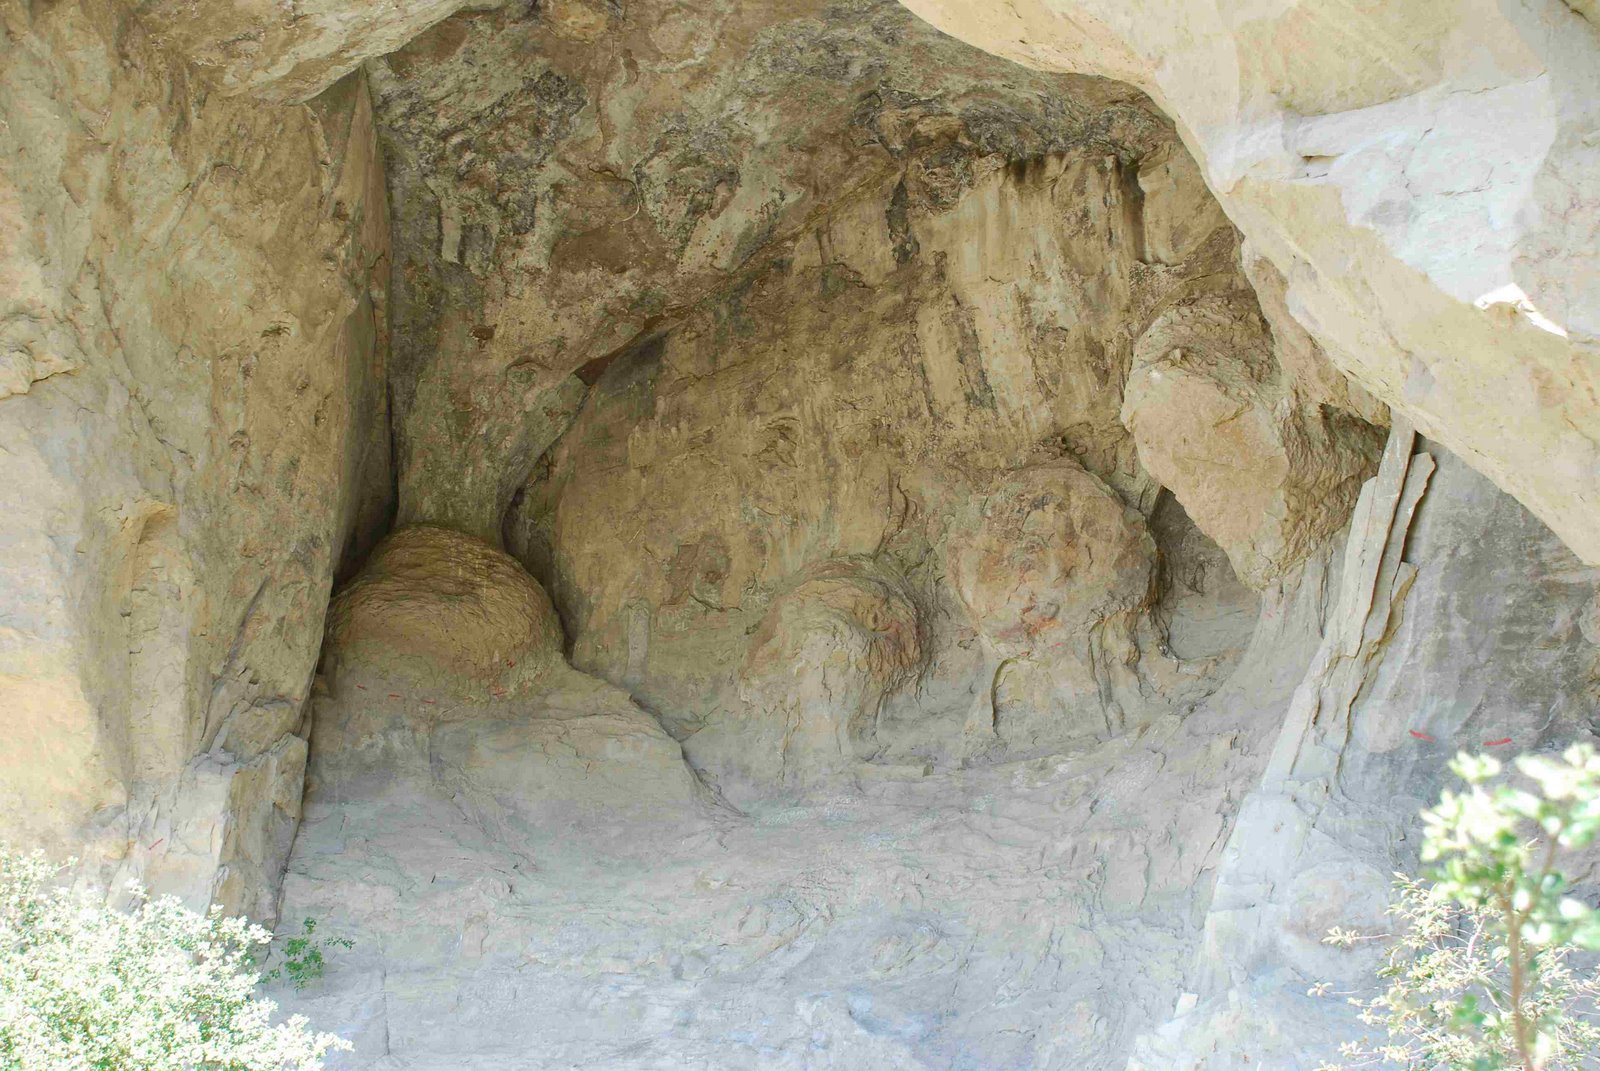 [Copy+of+09-13-07+Pictograph+Cave+State+Park+025.jpg]